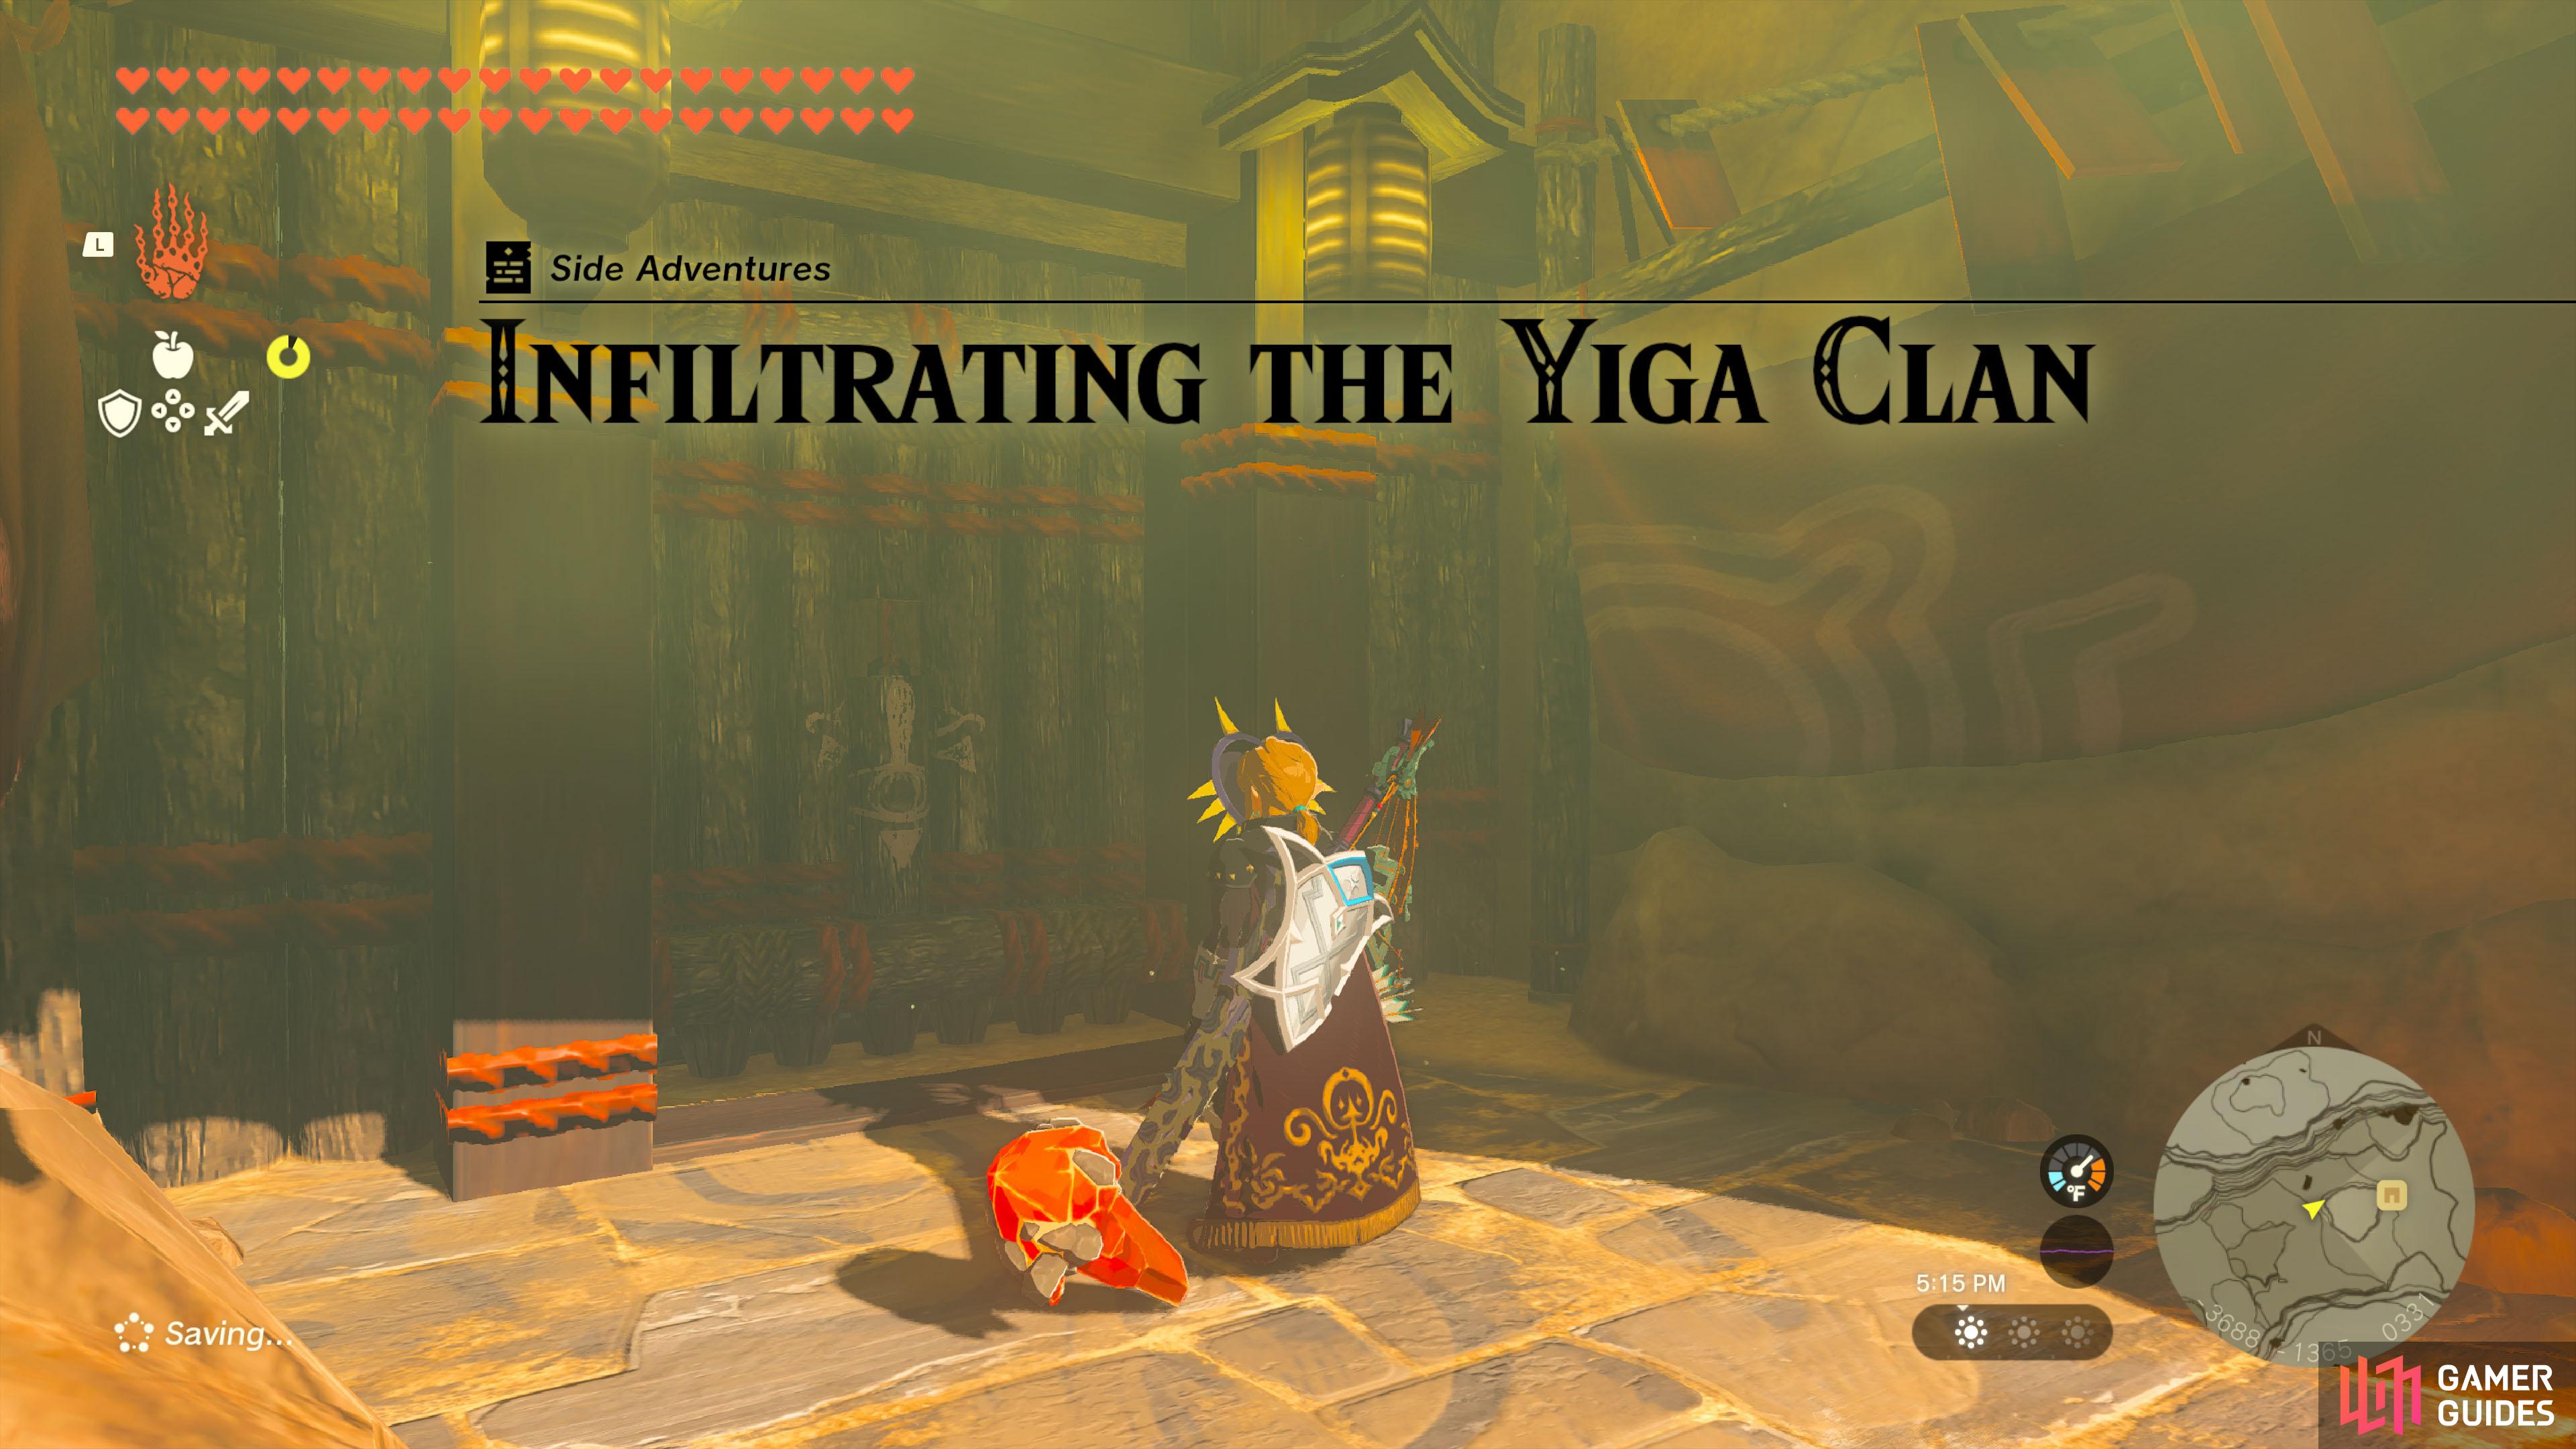 You will begin this side adventure when you try to enter the Yiga Clan Hideout in the Gerudo region.